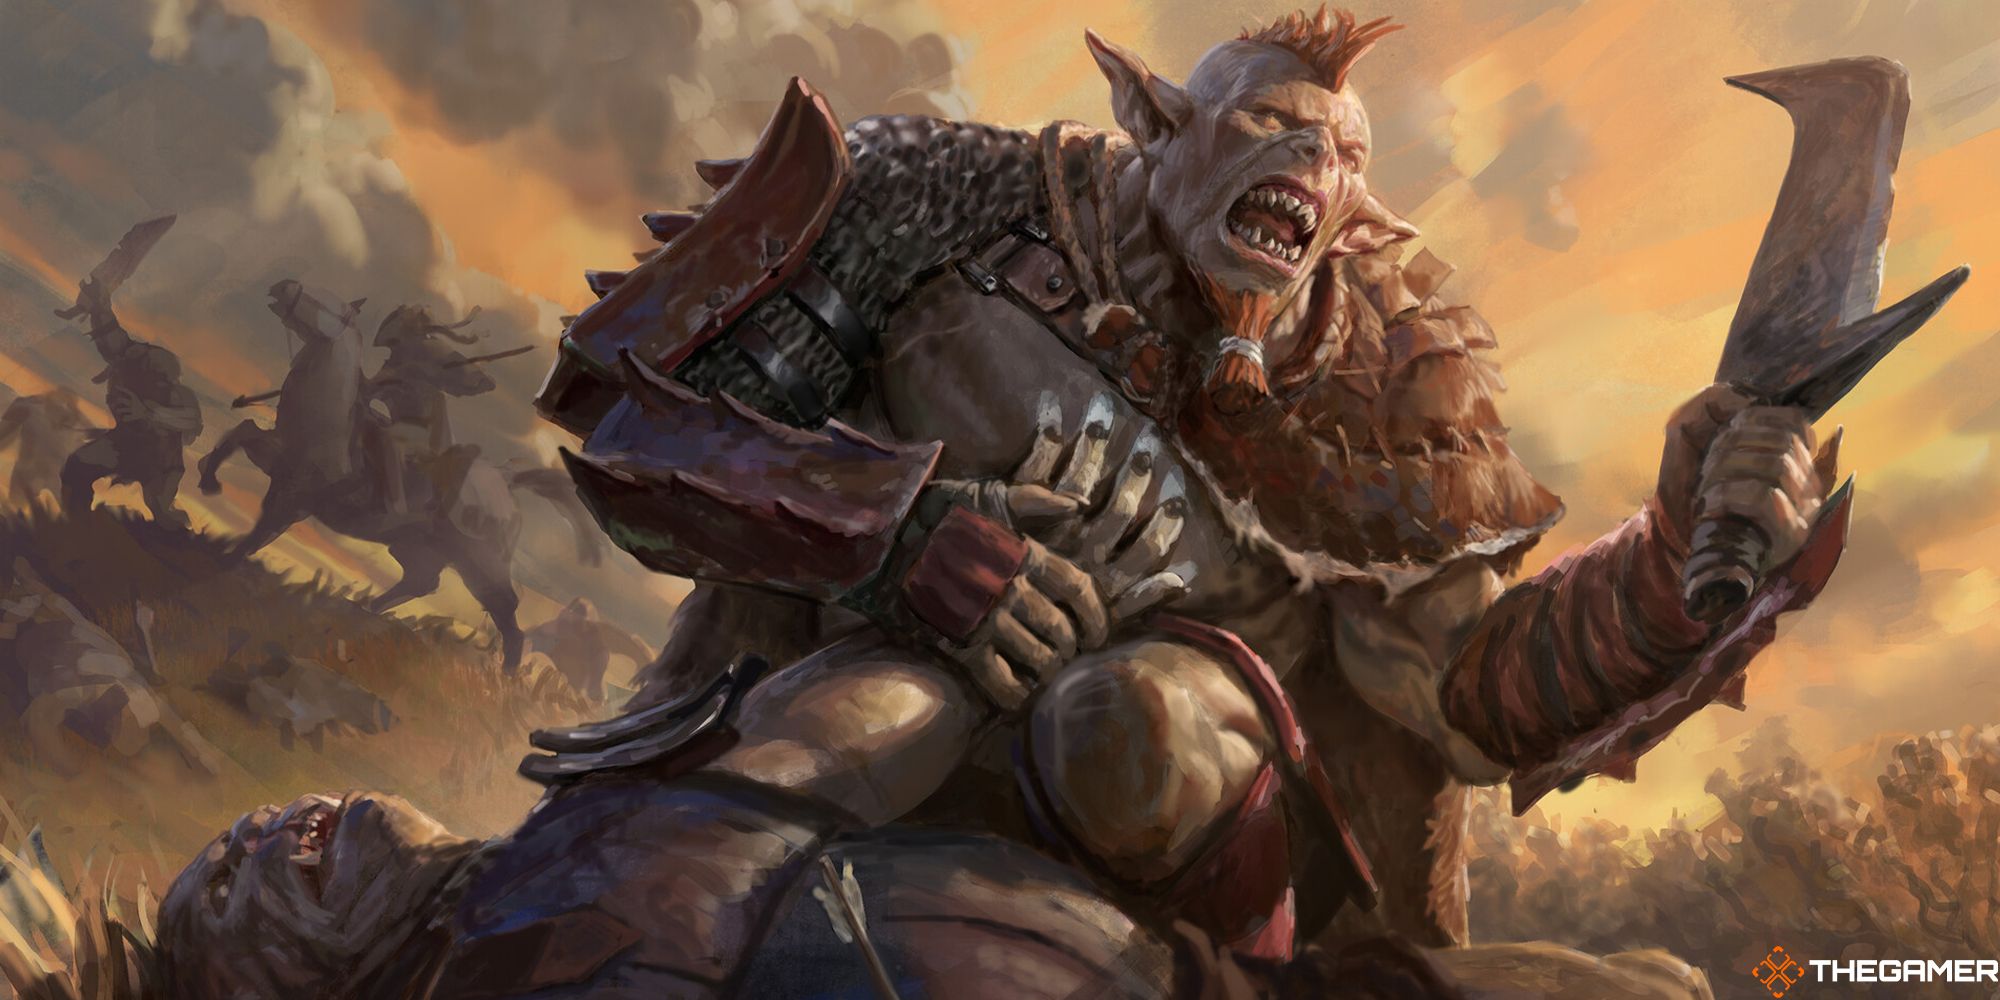 An Orc standing over a dead orc in Lord of the Rings and MTG